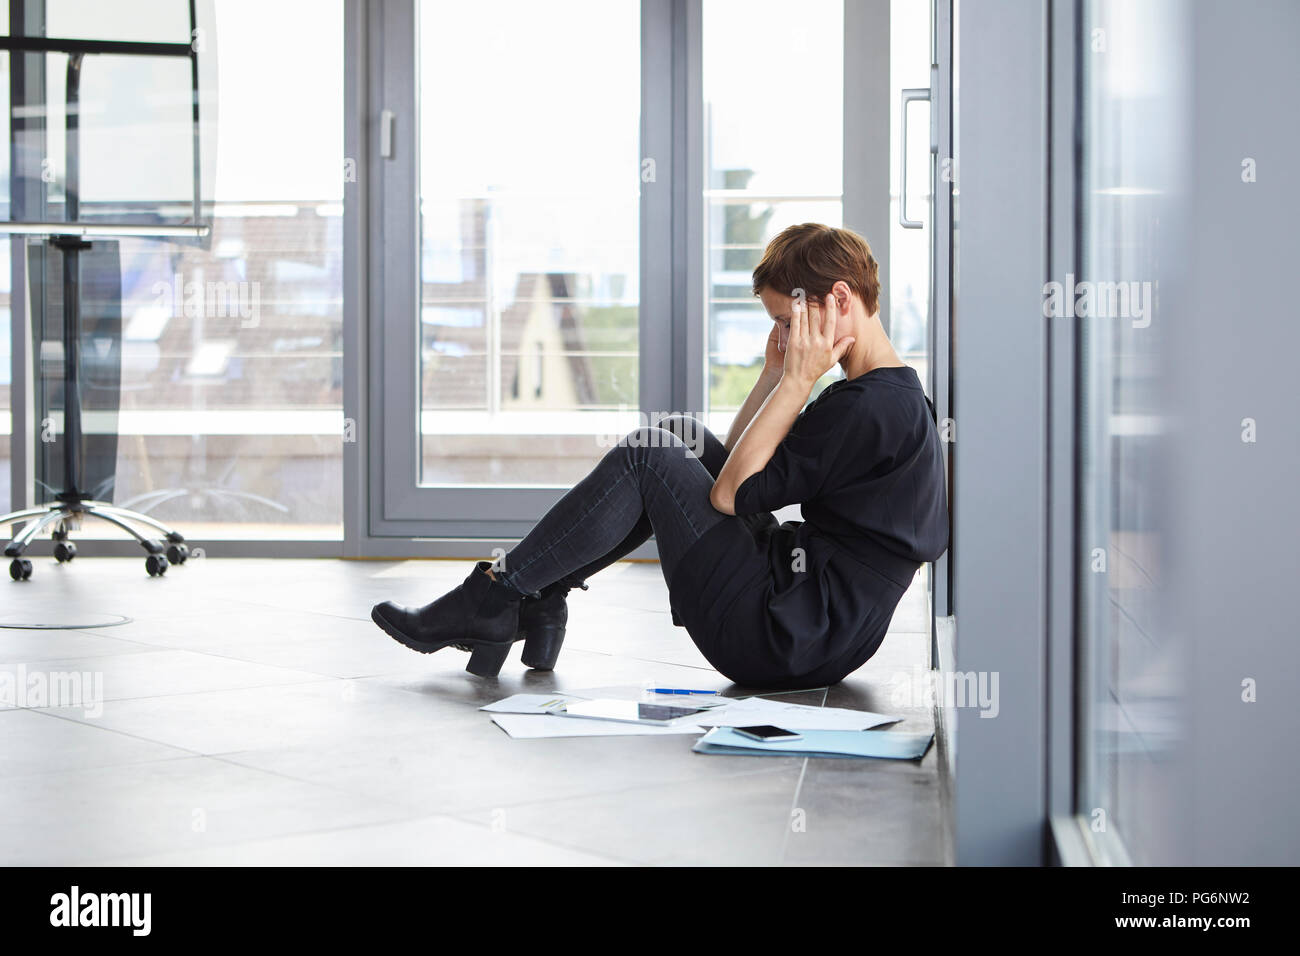 Overstressed businesswoman sitting on the floor in office Stock Photo